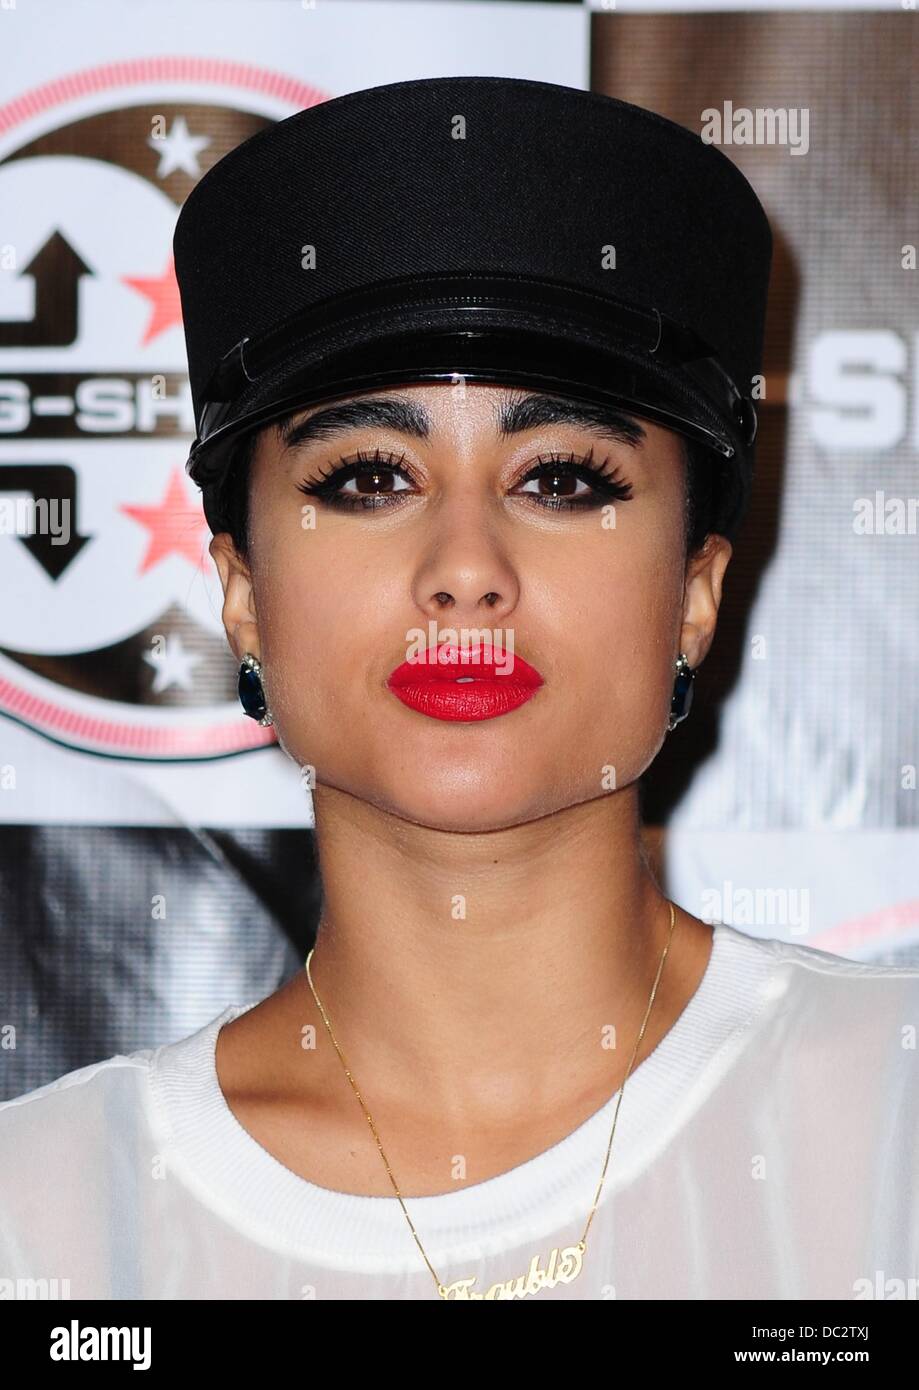 New York, NY. 7th Aug, 2013. Natalia Kills at arrivals for G-Shock's SHOCK THE WORLD 2013, Basketball City, New York, NY August 7, 2013. Credit:  Gregorio T. Binuya/Everett Collection/Alamy Live News Stock Photo